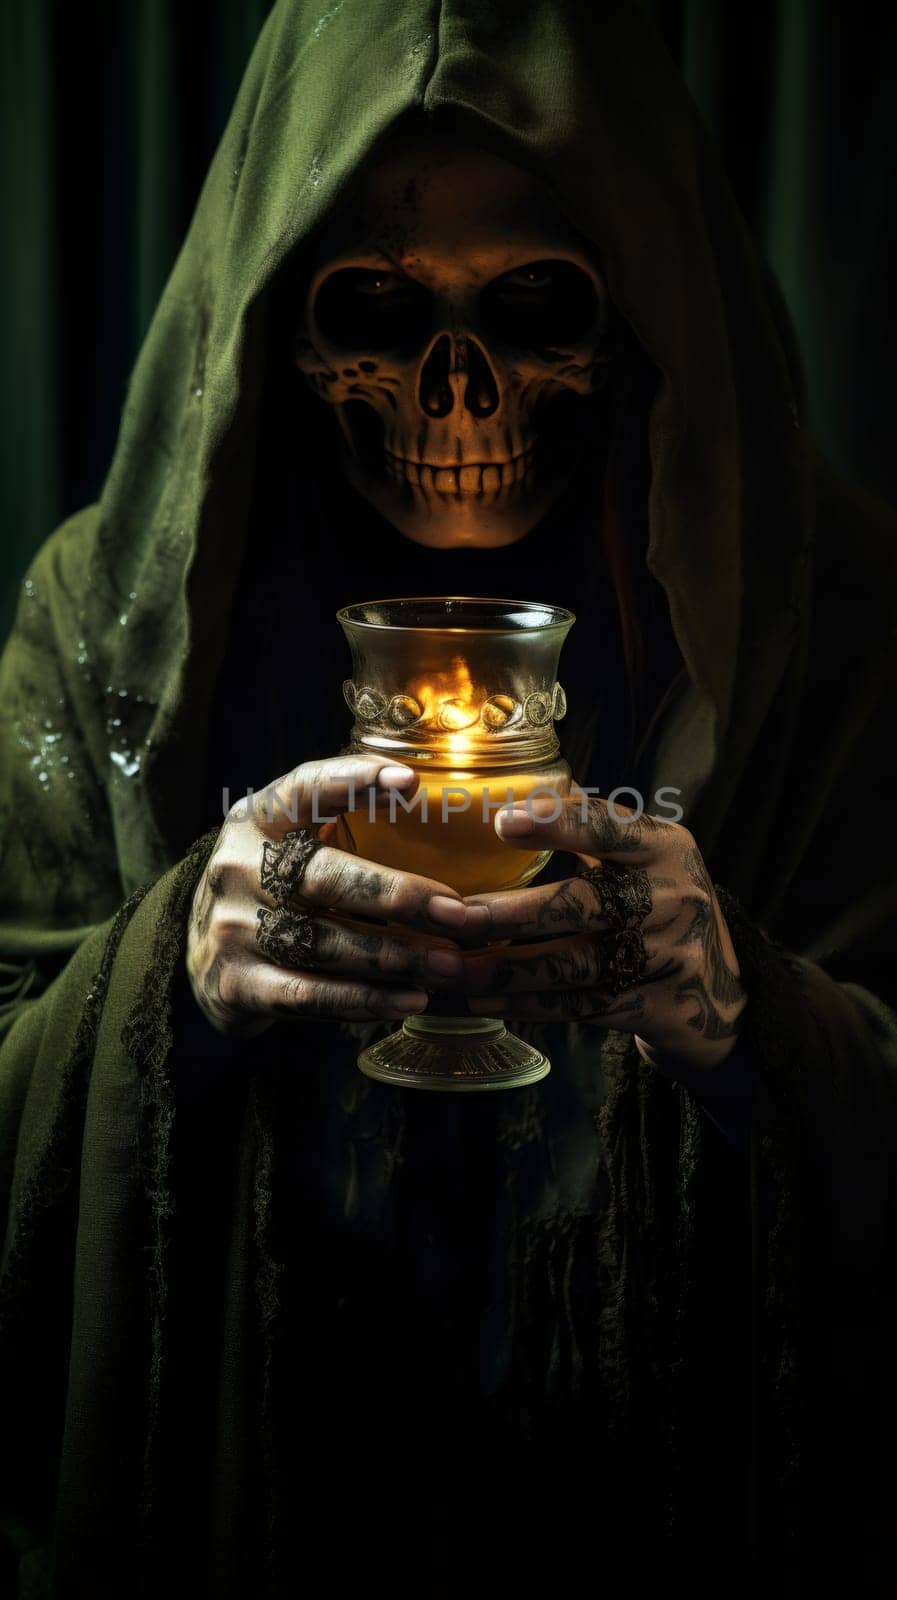 A sorcerer man holds a glass with a burning candle. by Nataliya